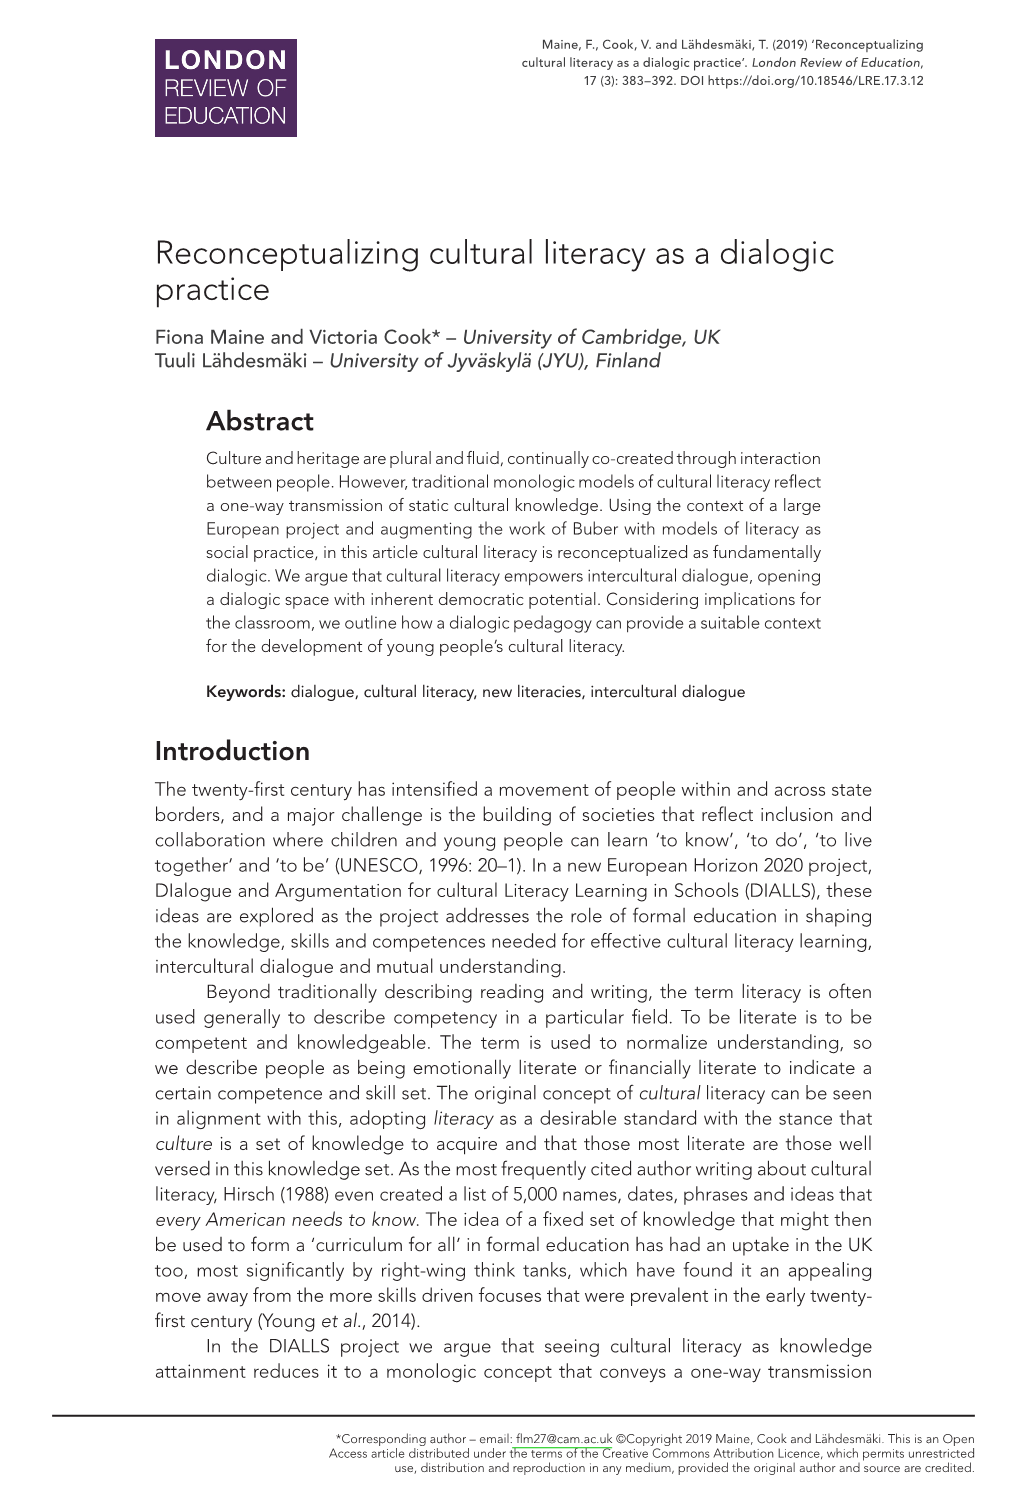 Reconceptualizing Cultural Literacy As a Dialogic Practice’